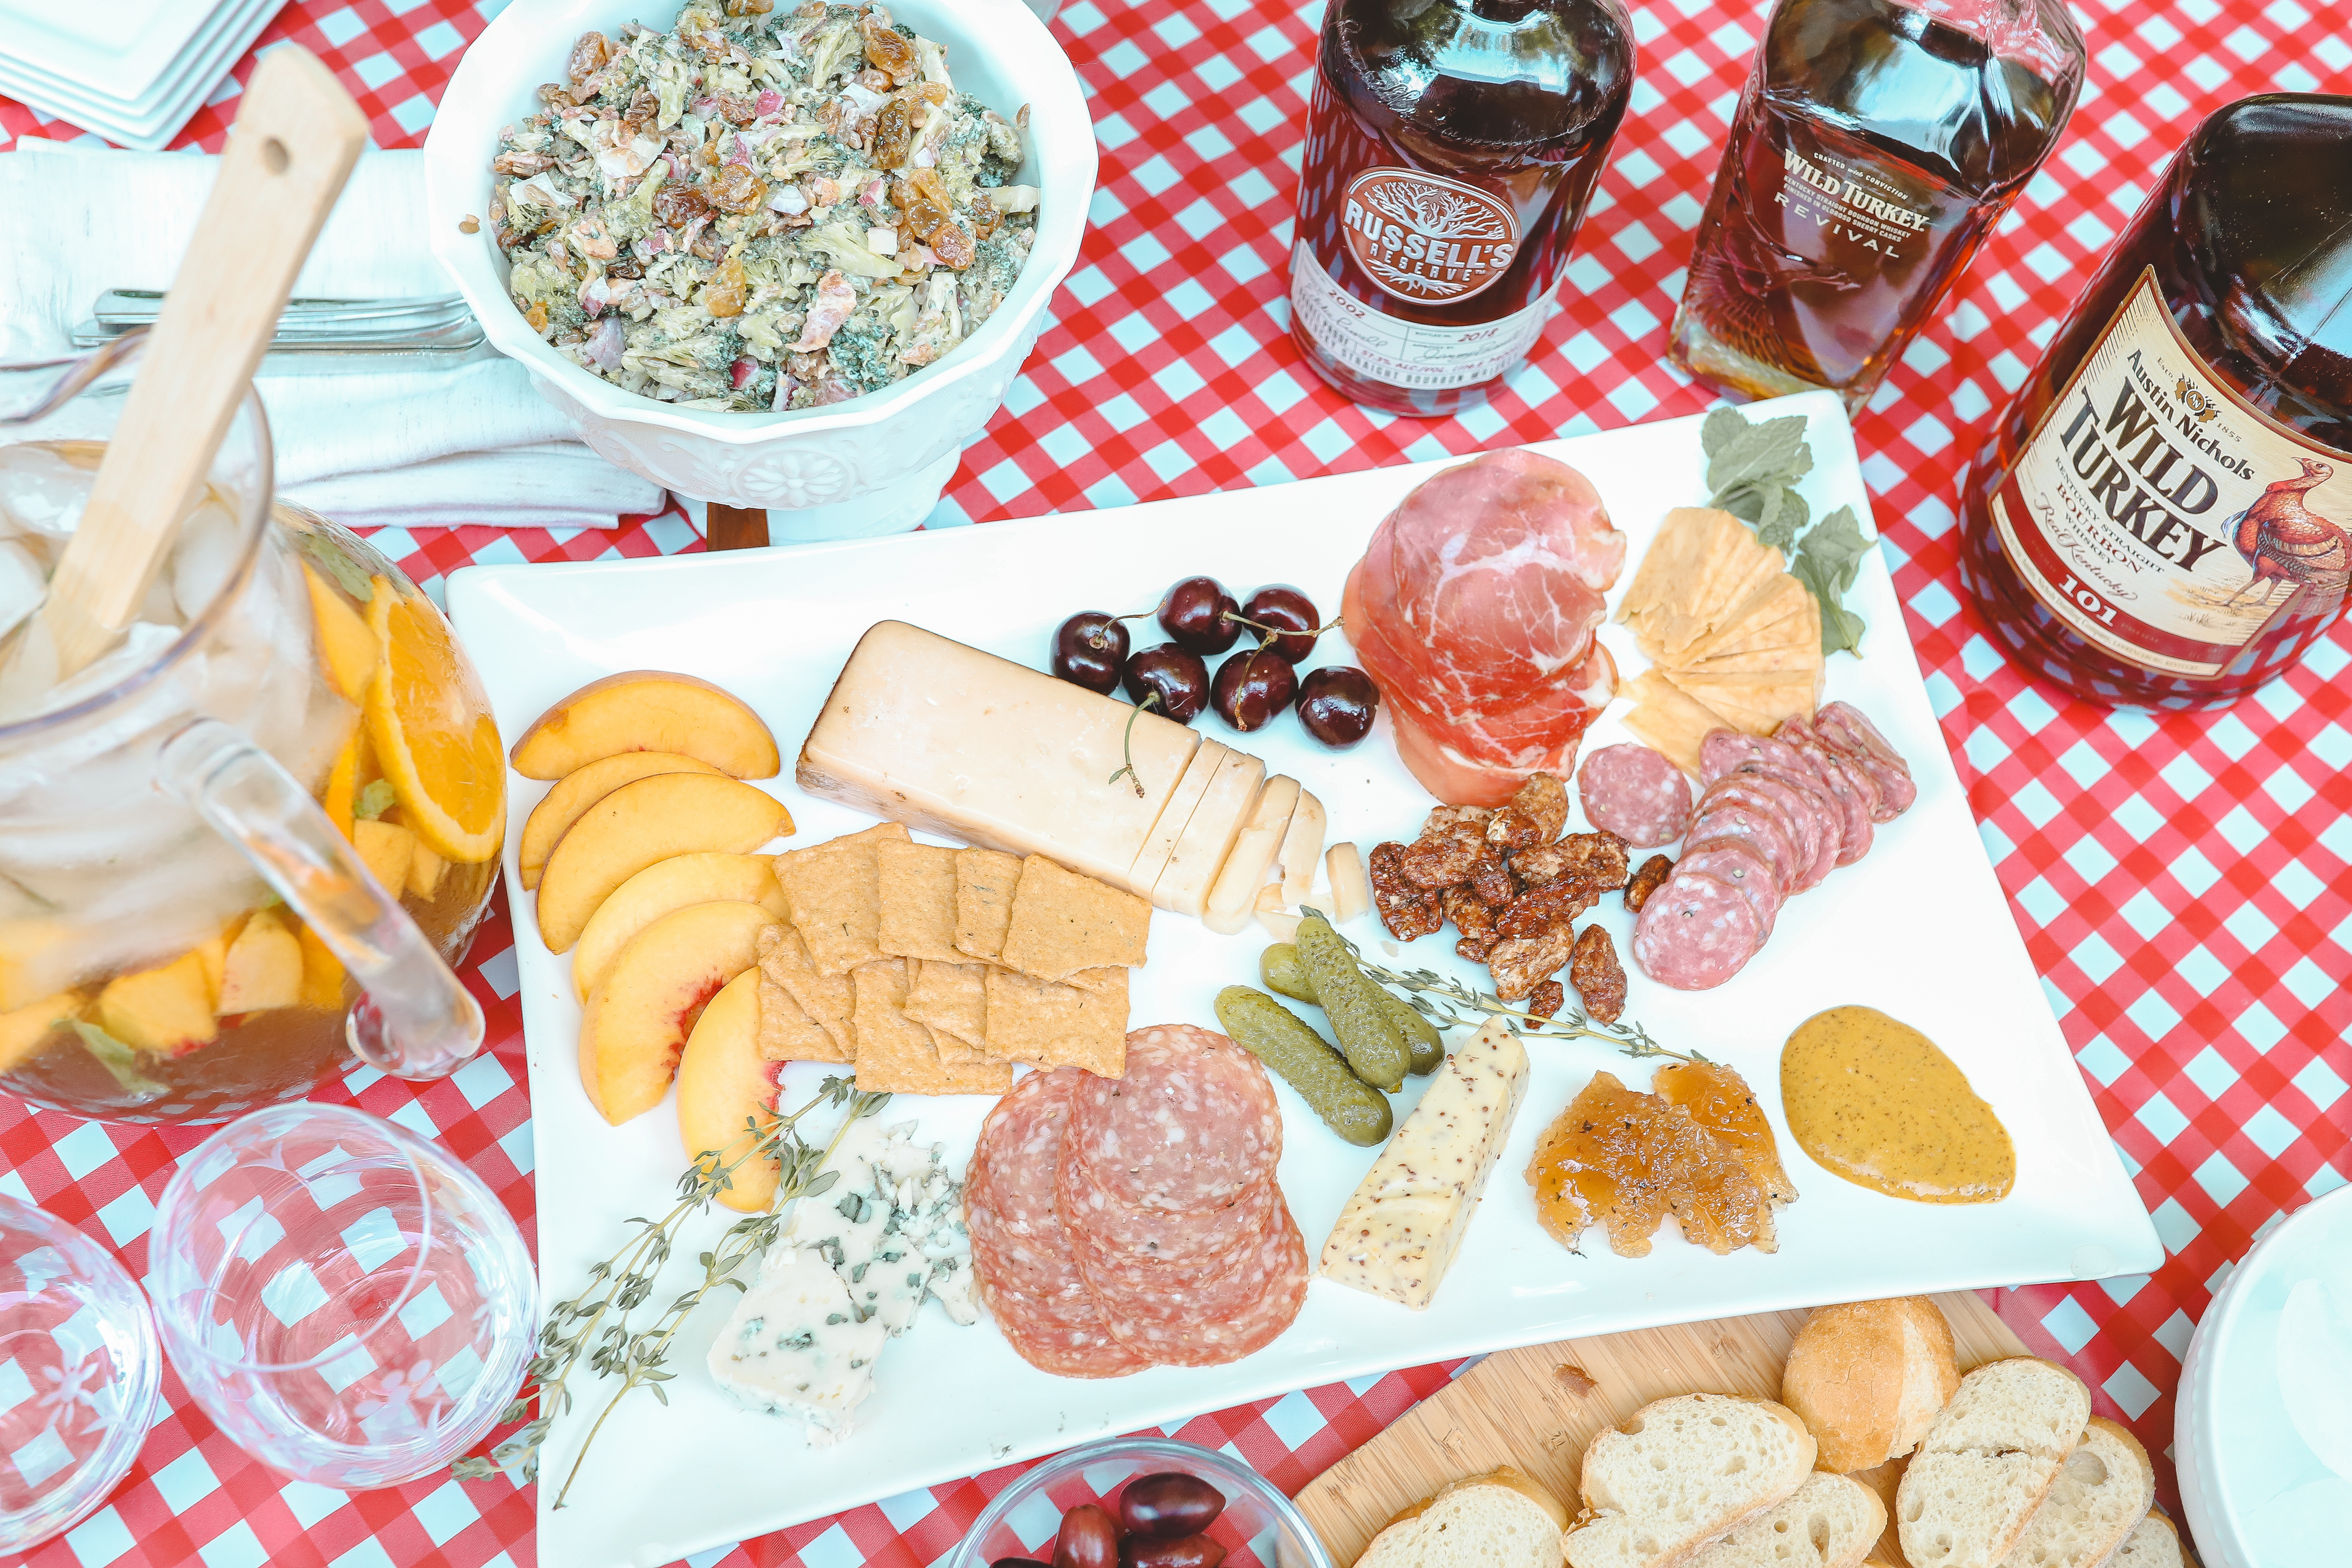 How to build a grat charcuterie and cheese board.